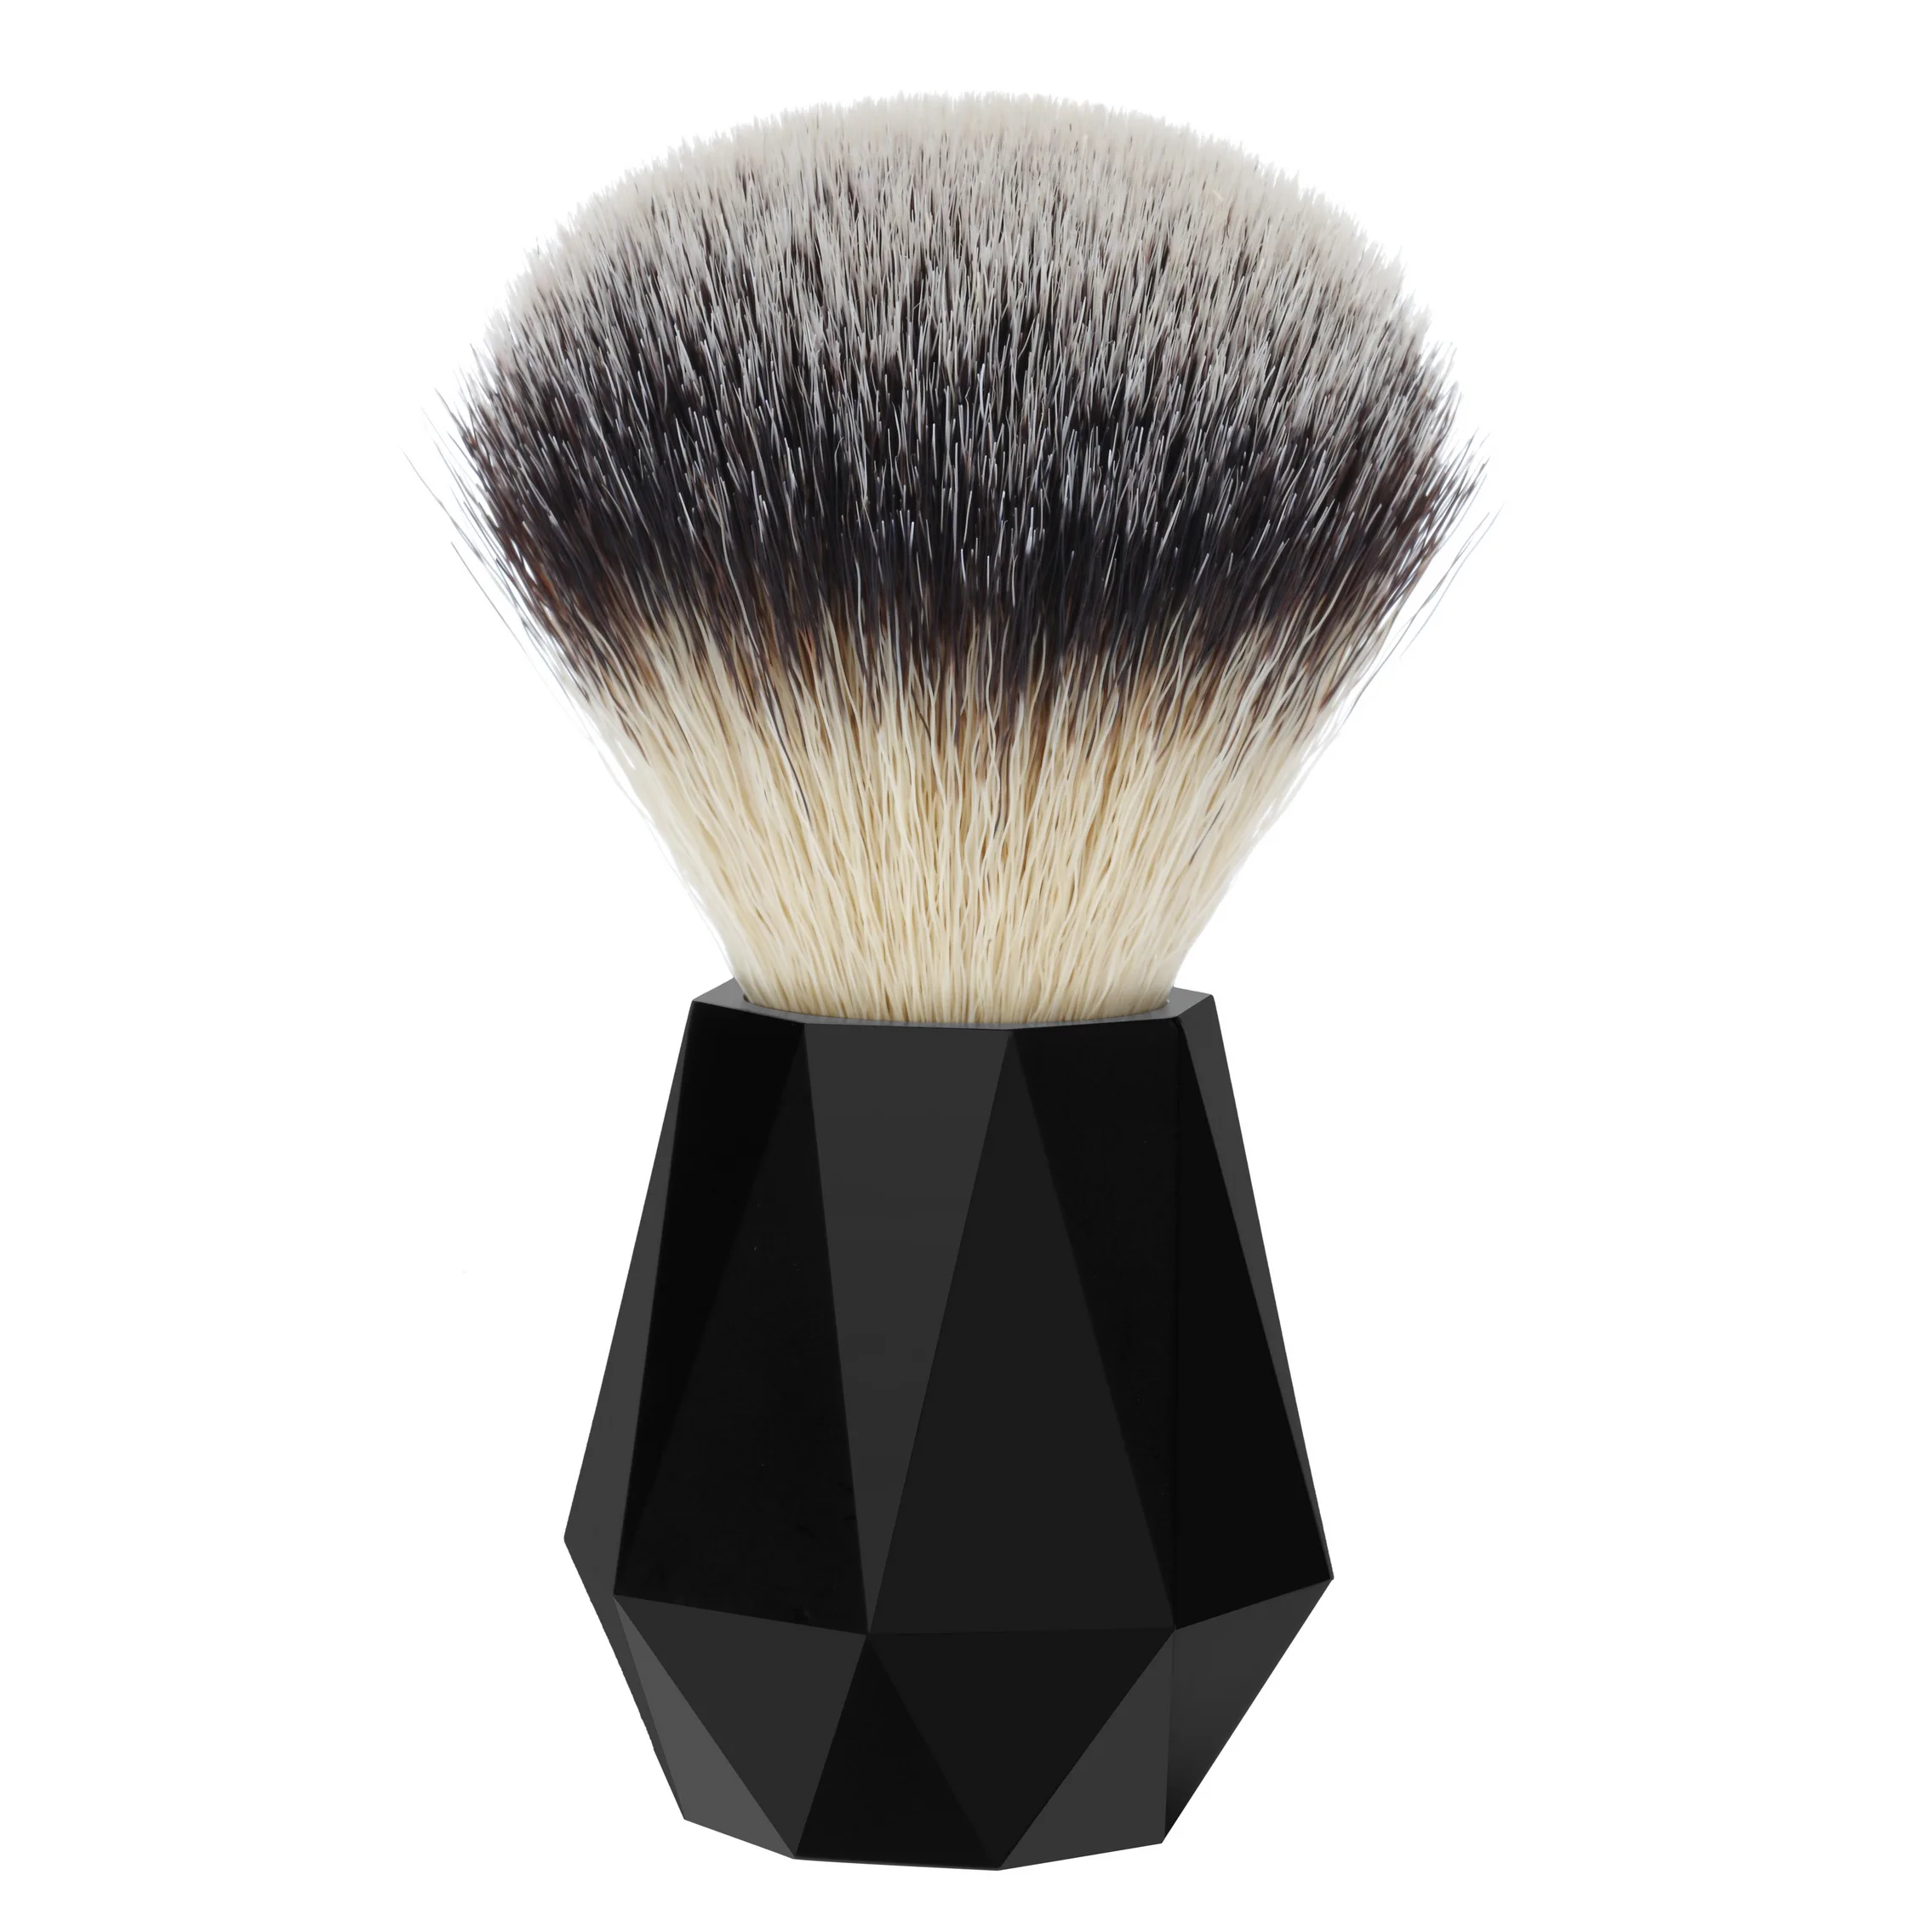 

JDK Black Polygon Handle Shaving Brush with 100% Finest Synthetic Fibres Hair, Same as the picture